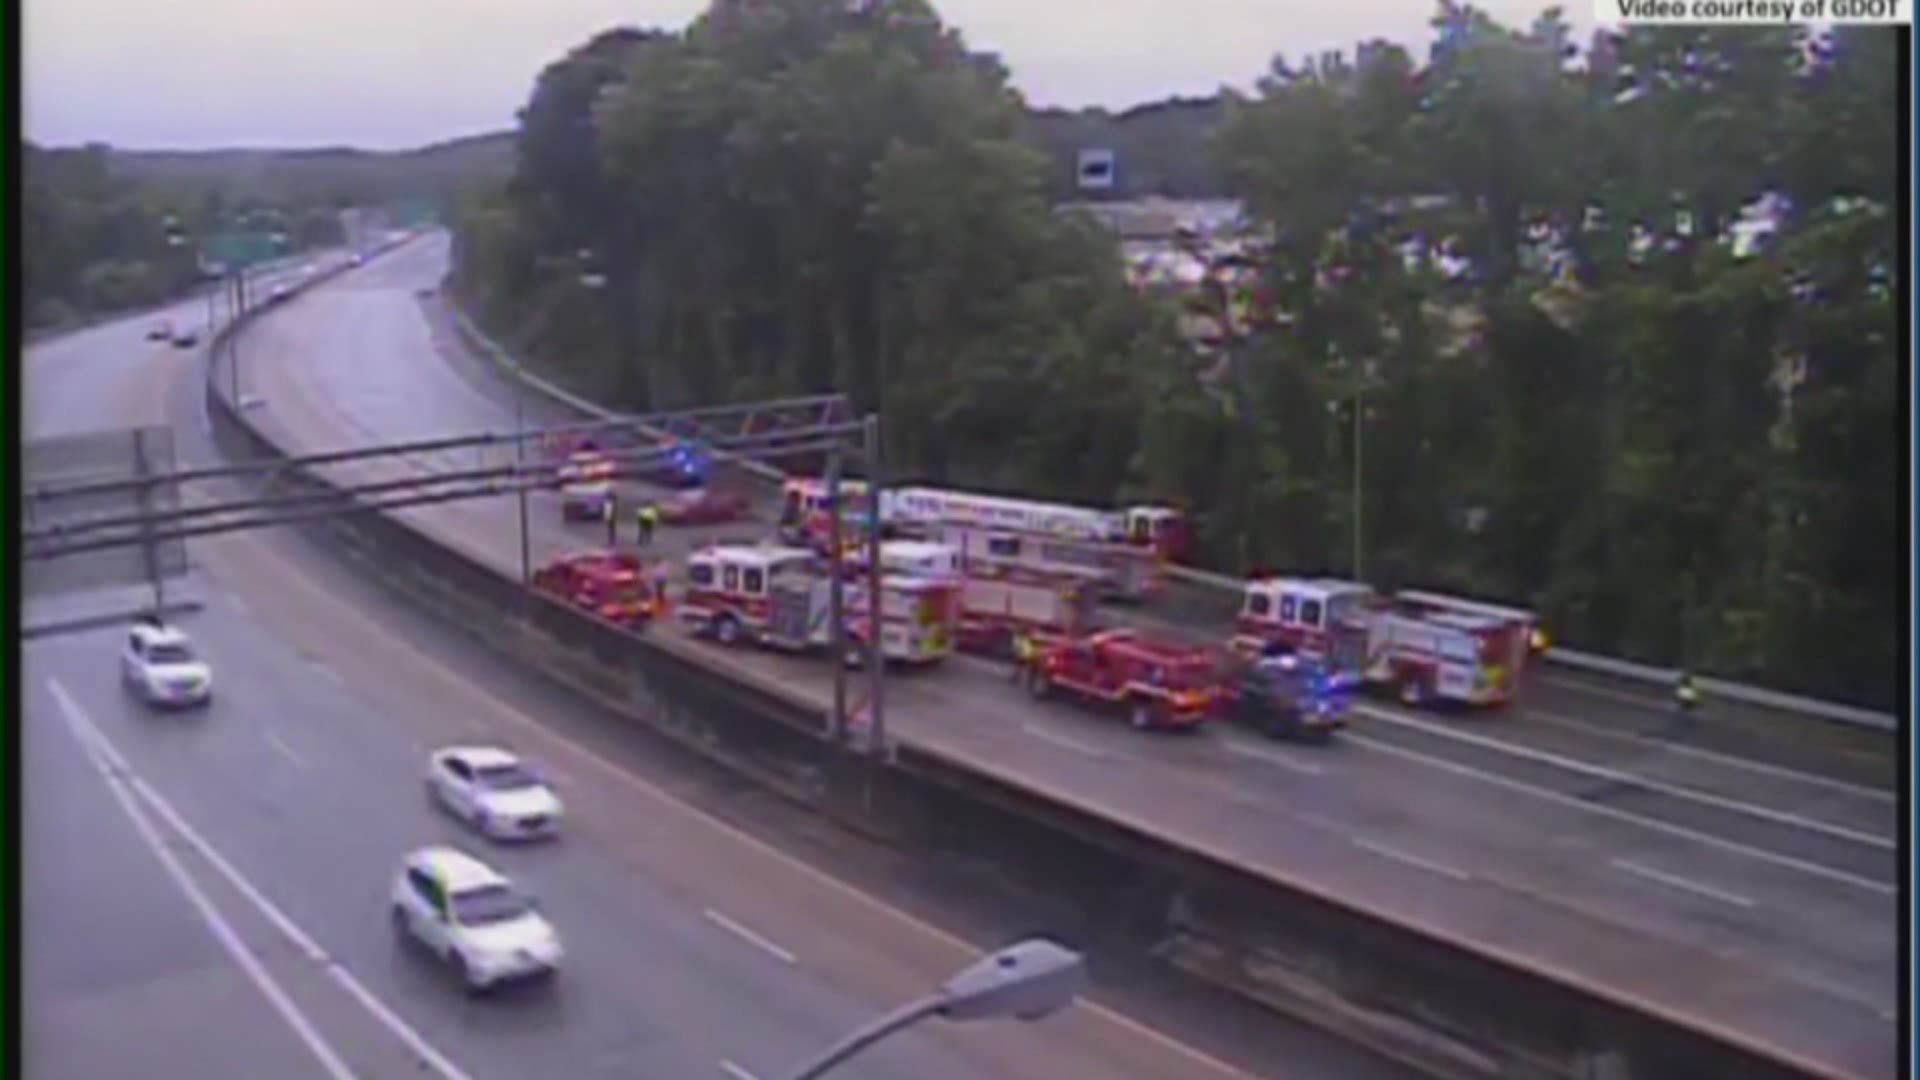 An Atlanta firefighter was severely injured in a wreck on I-85 Sunday morning.